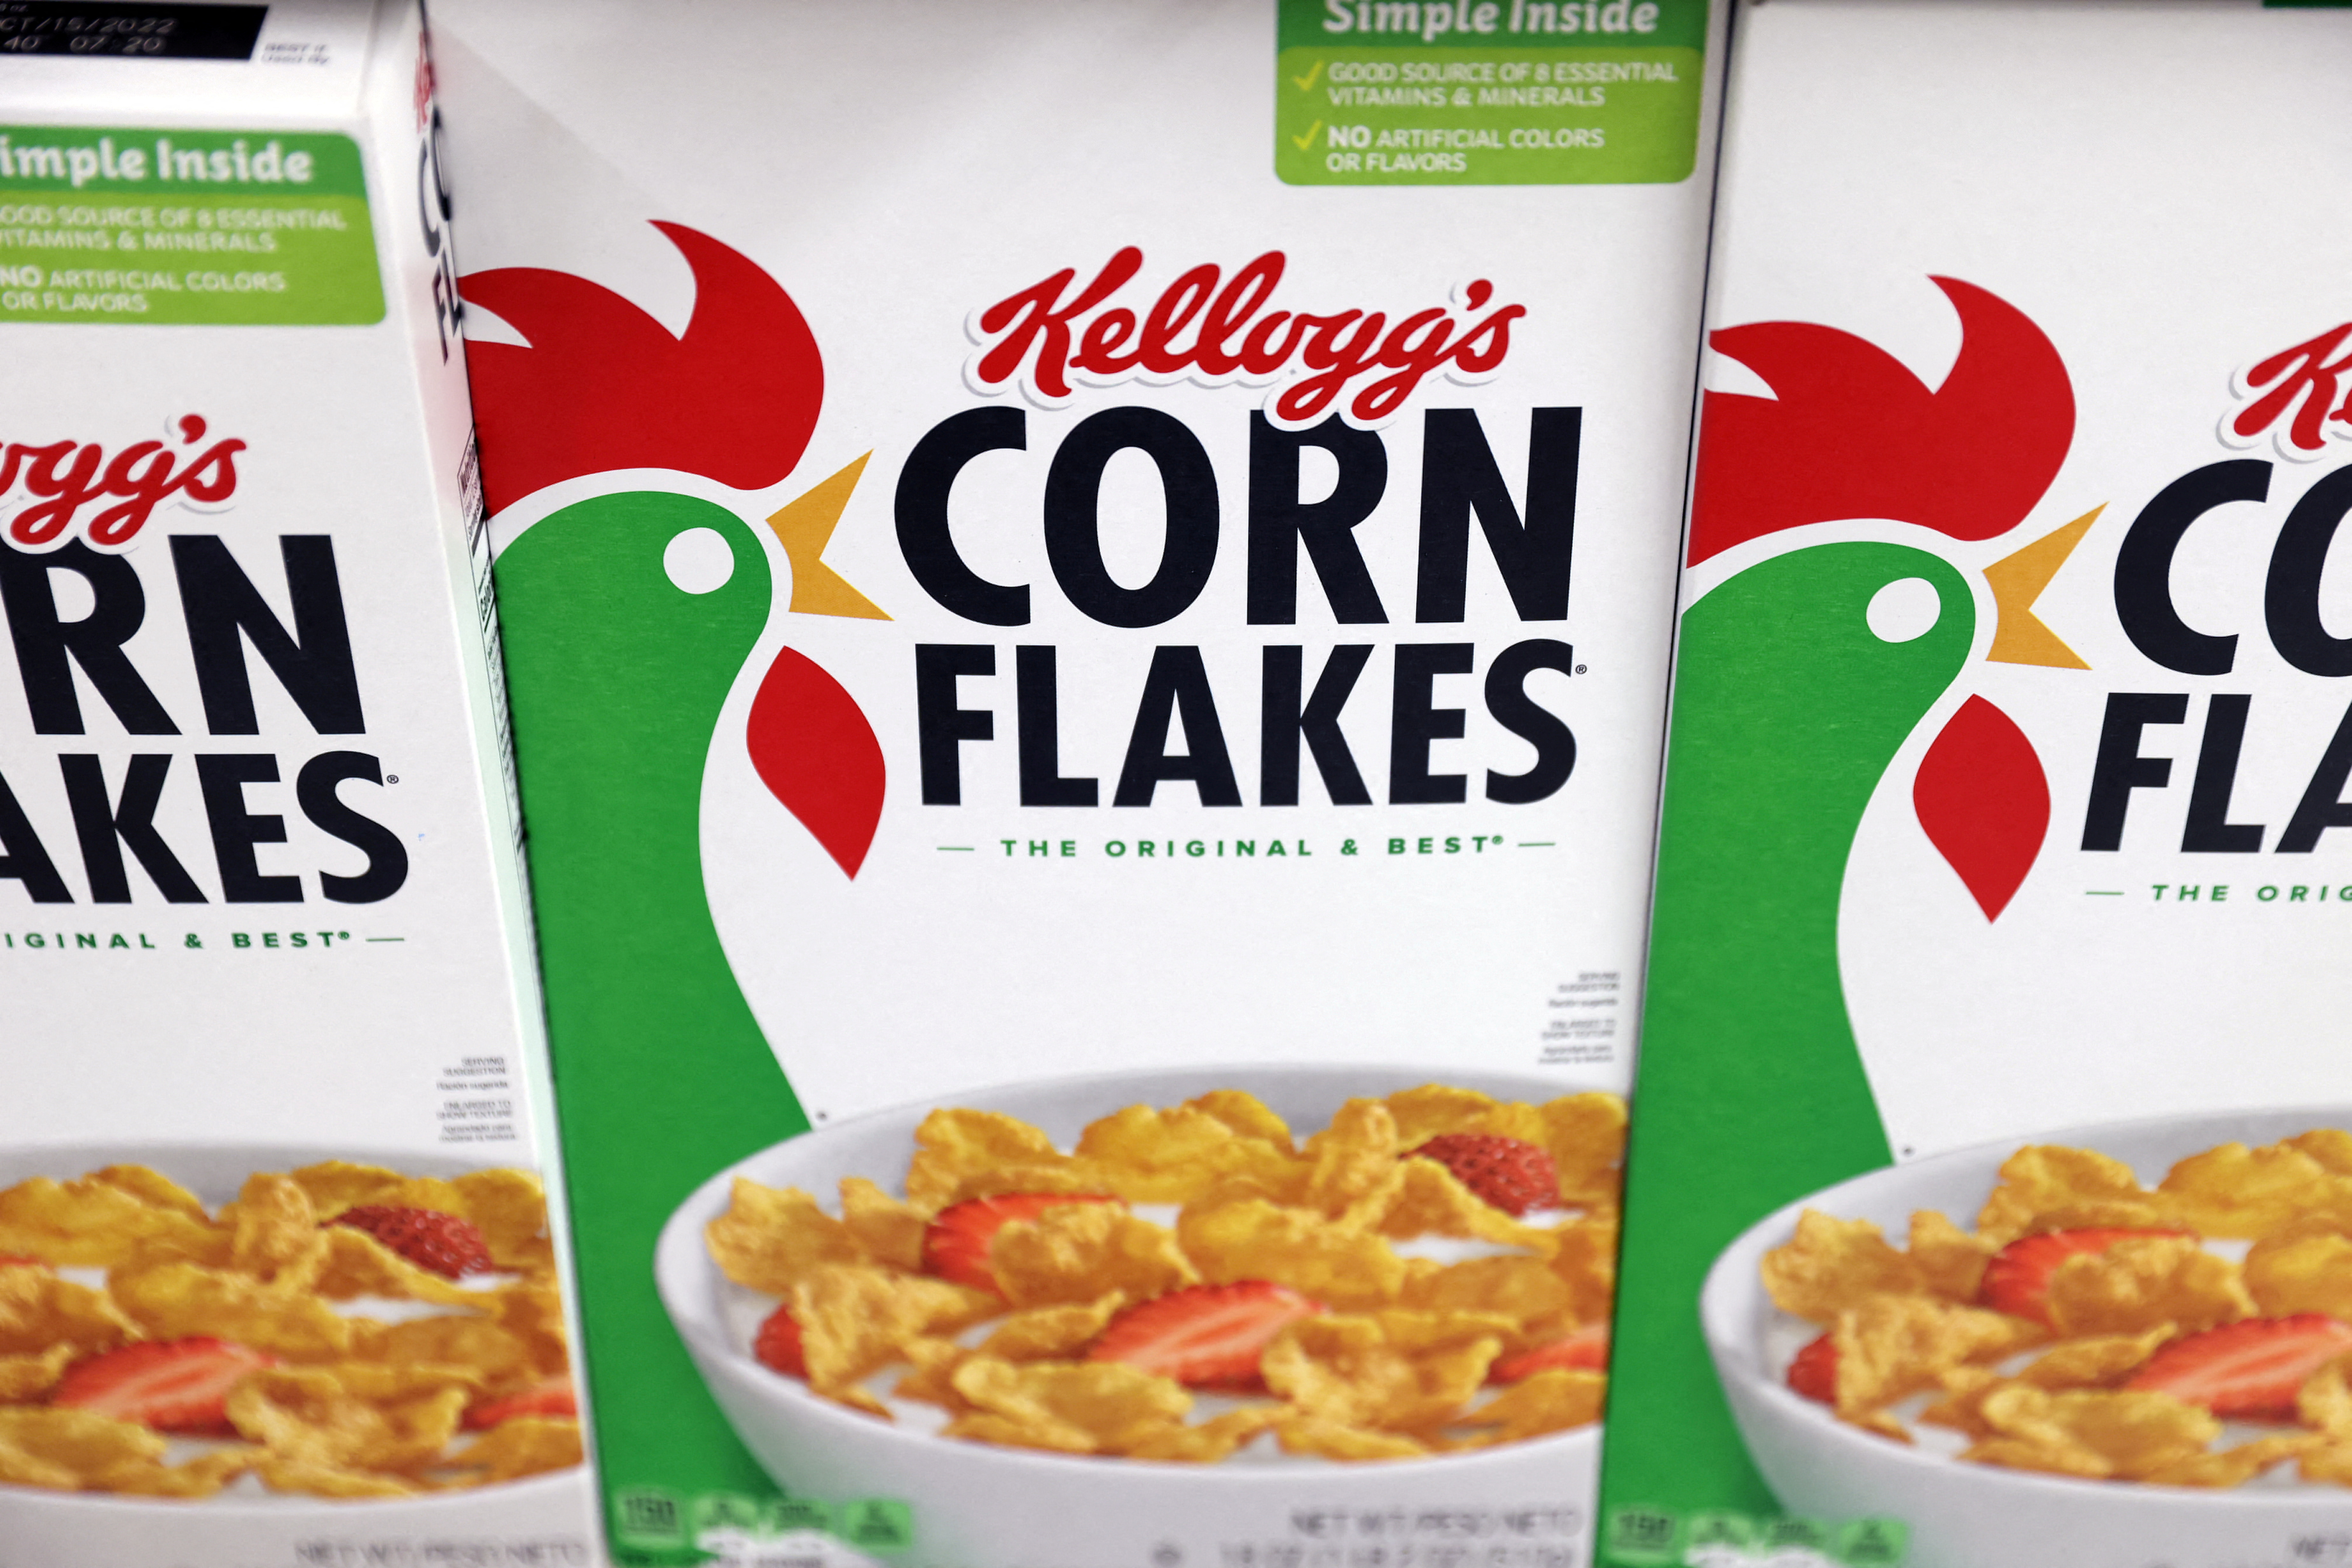 Kellogg's Corn Flakes owned by Kellogg Company is seen for sale in a store in Queens, New York City